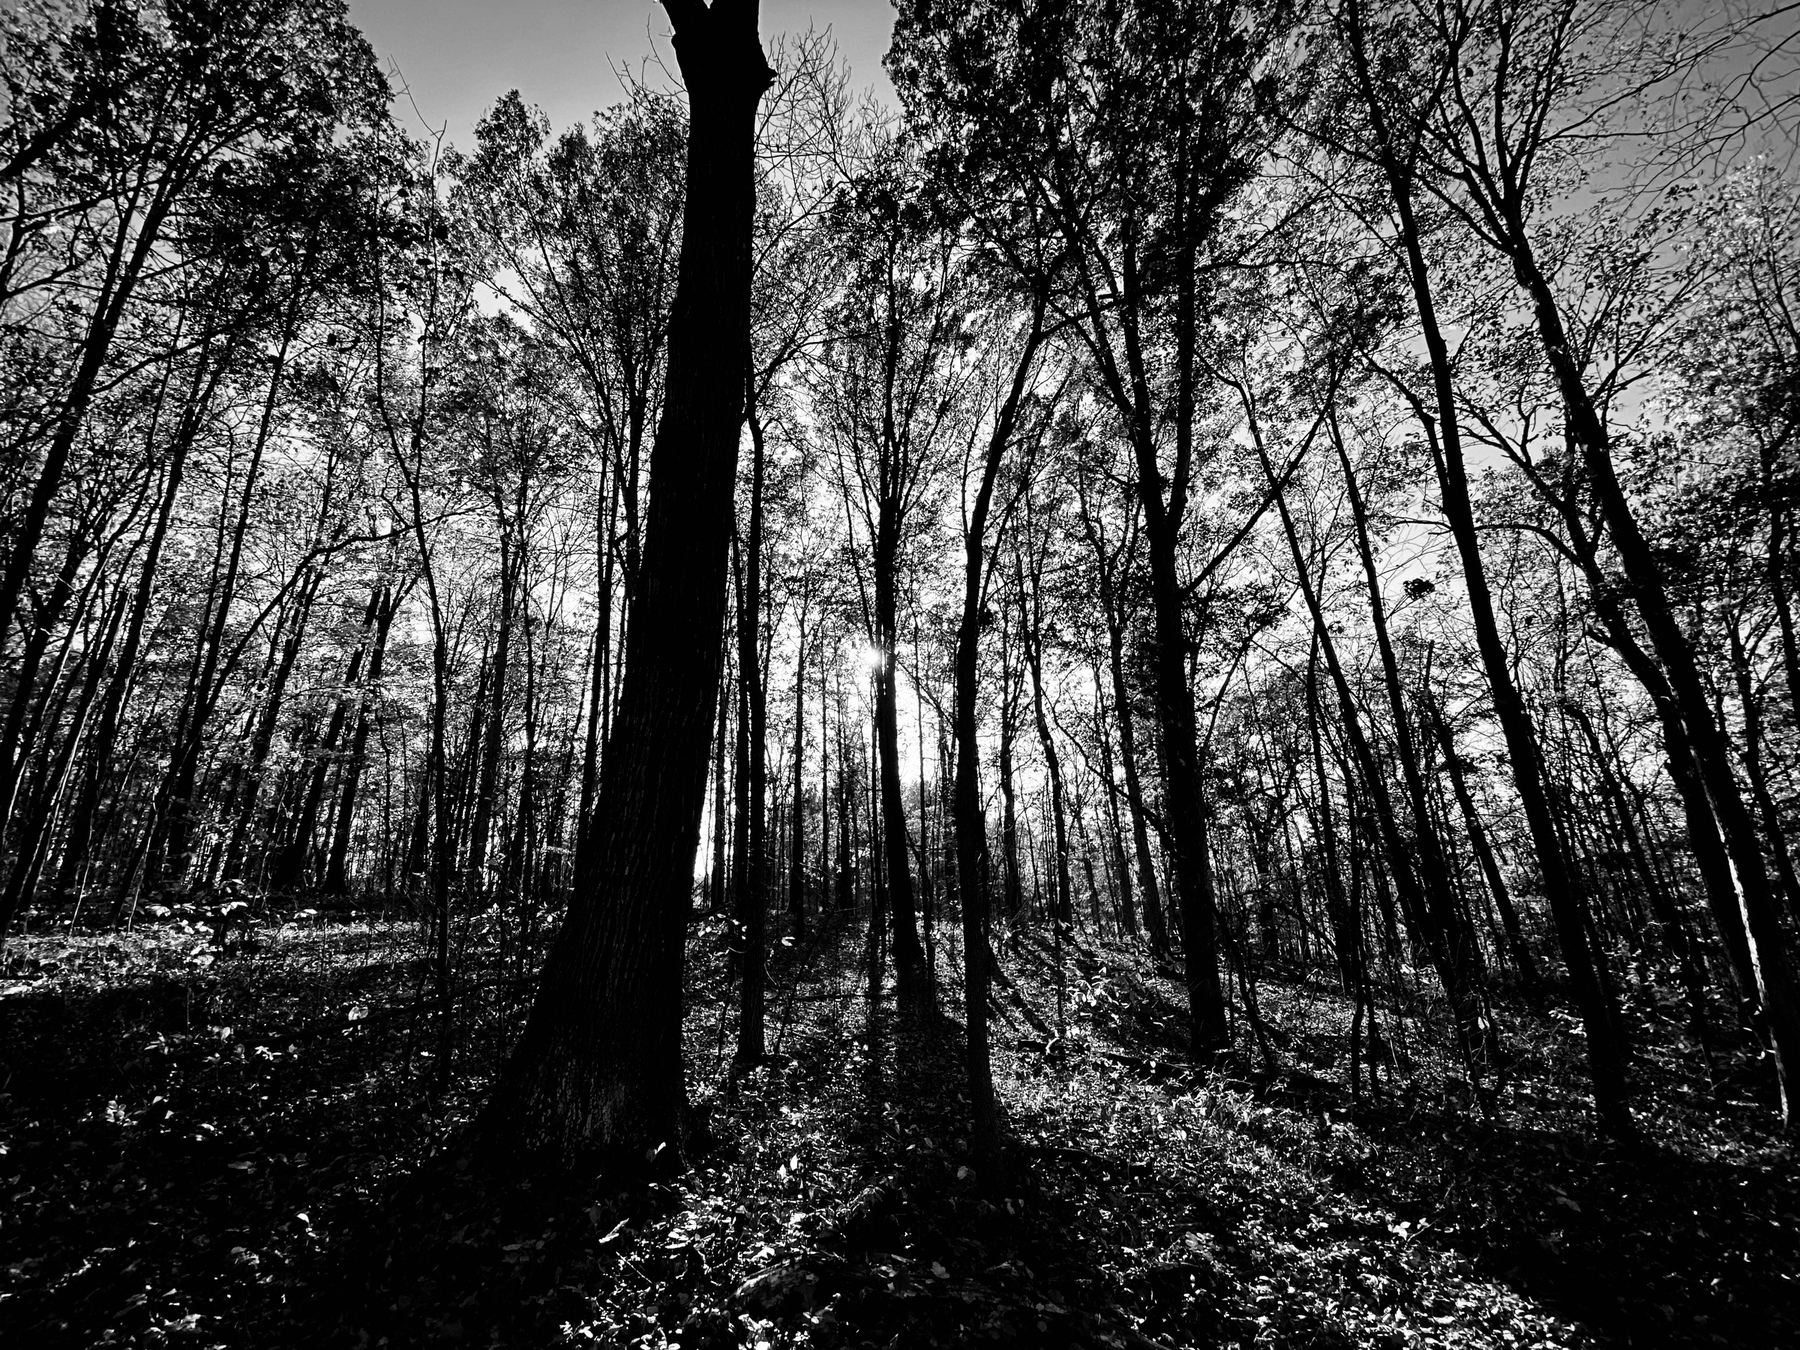 Forrest of trees in Fall in black and white